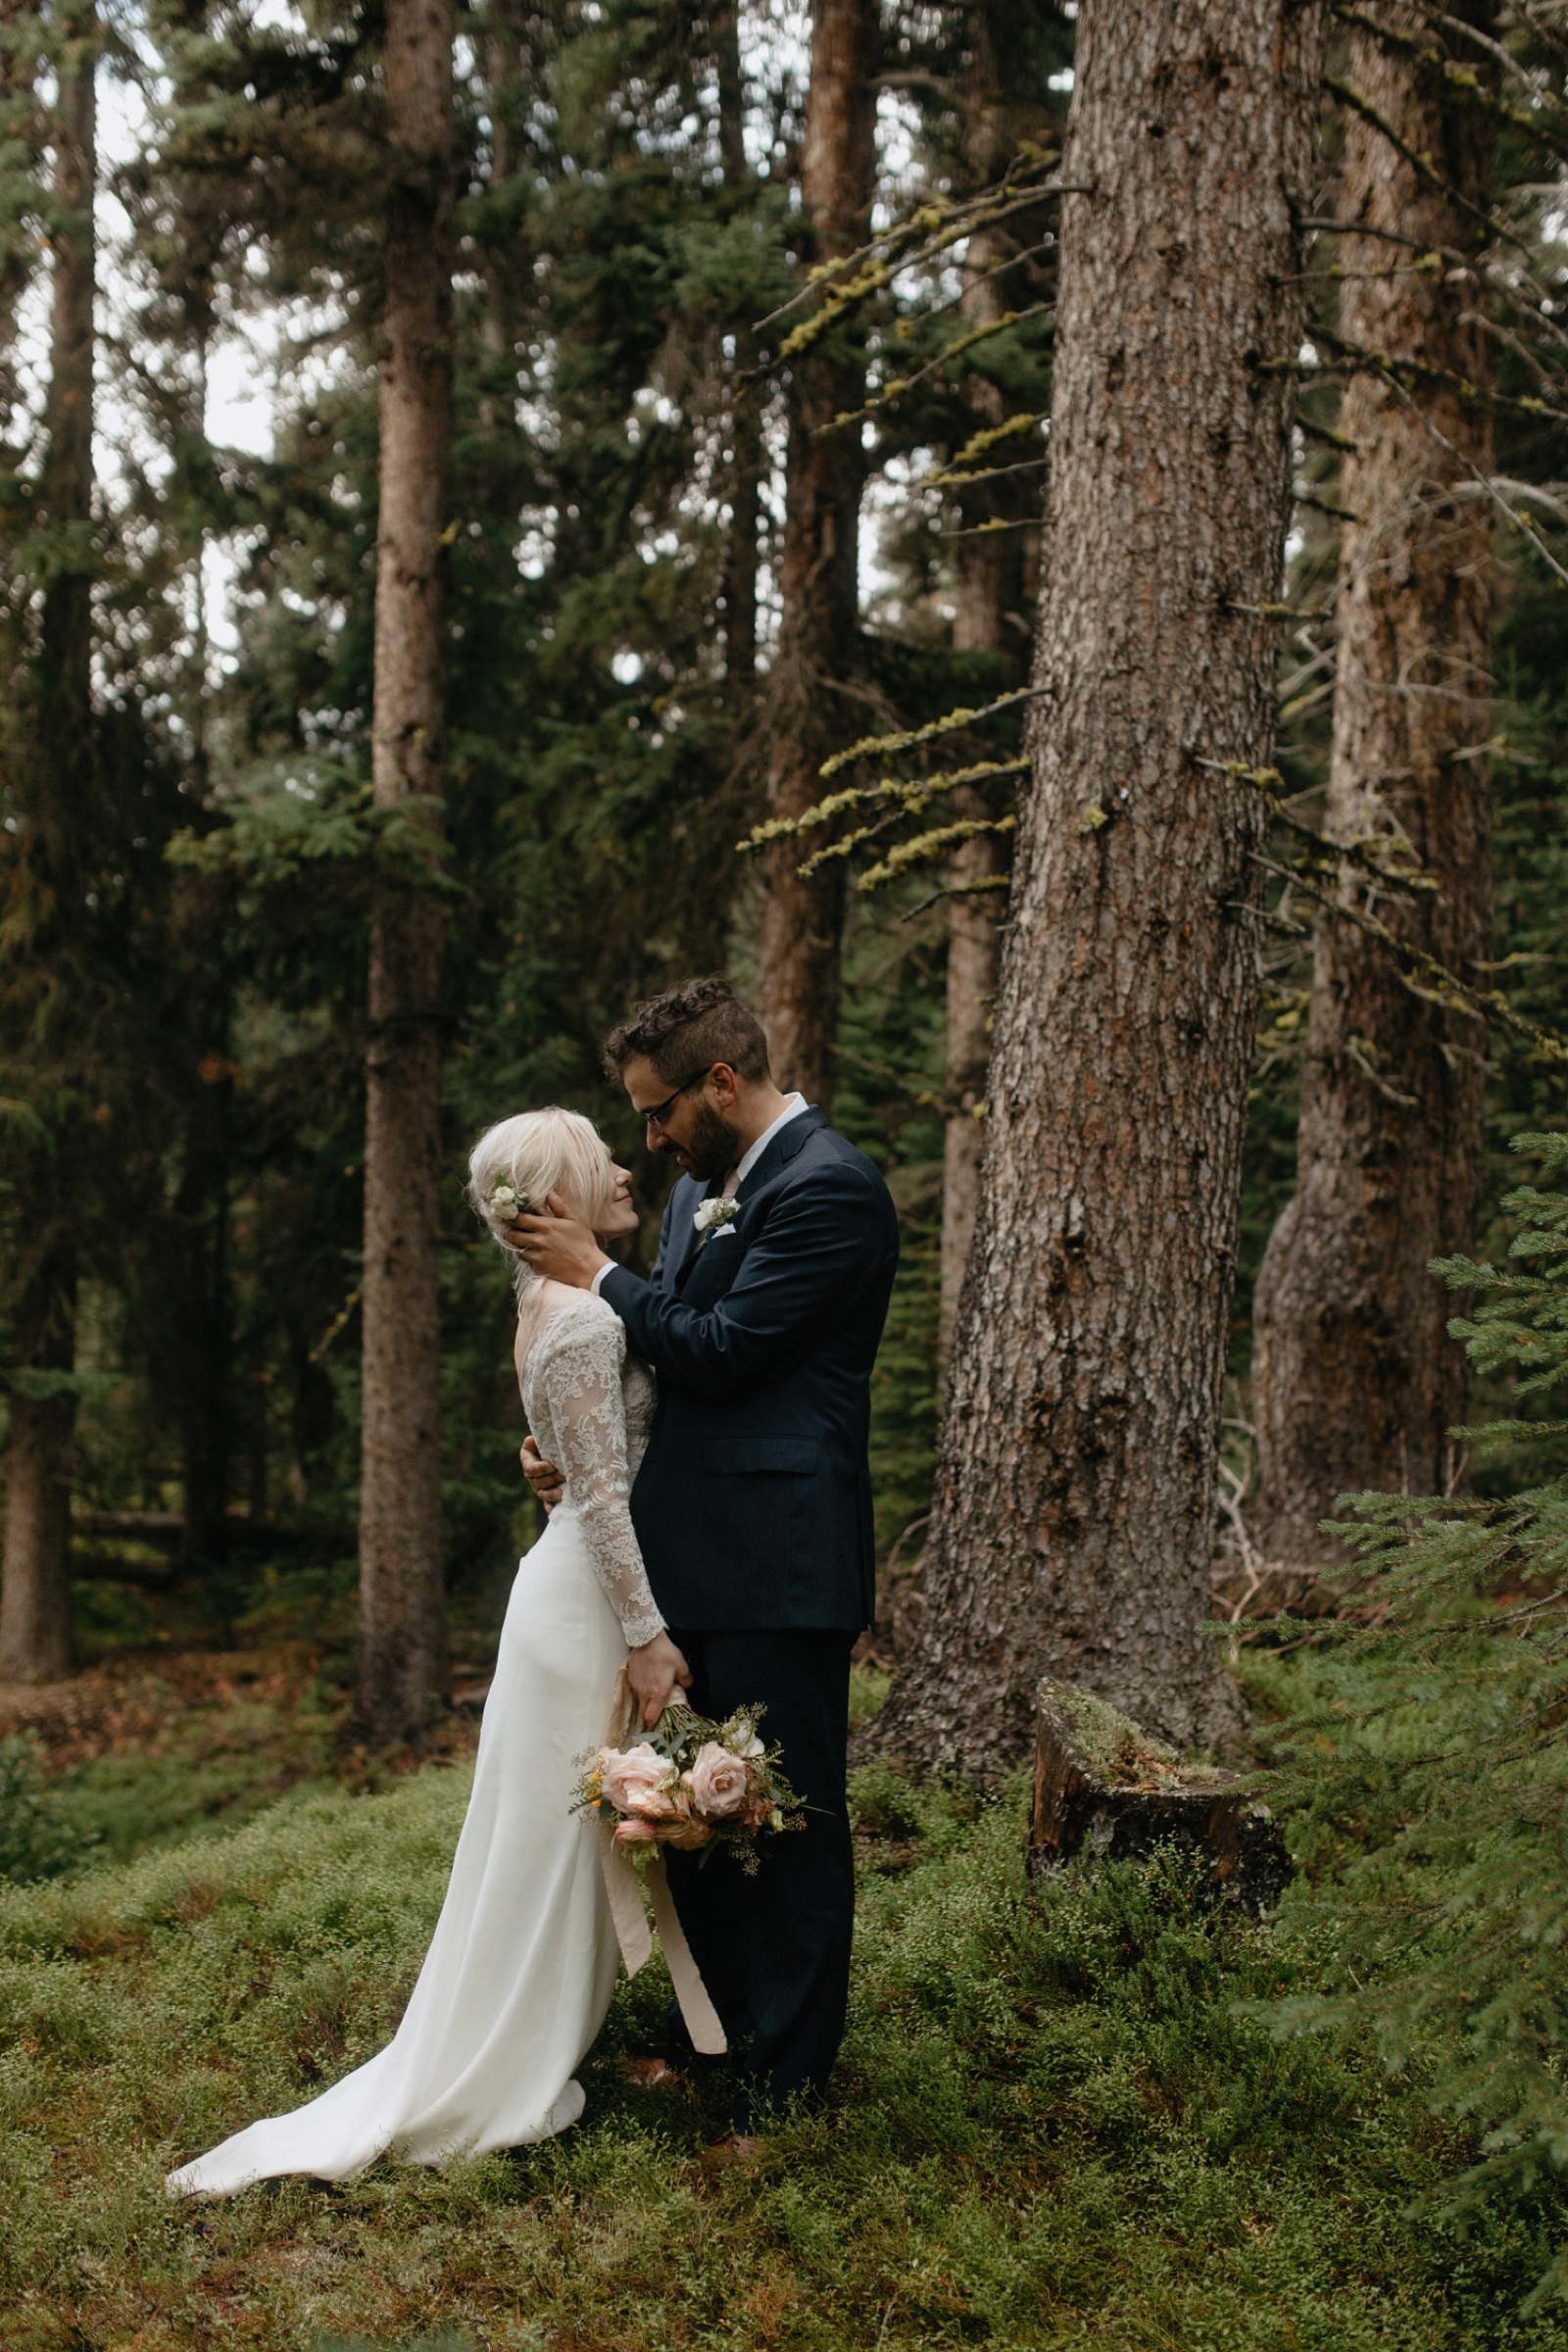 Old forest wedding portraits with a couple embracing